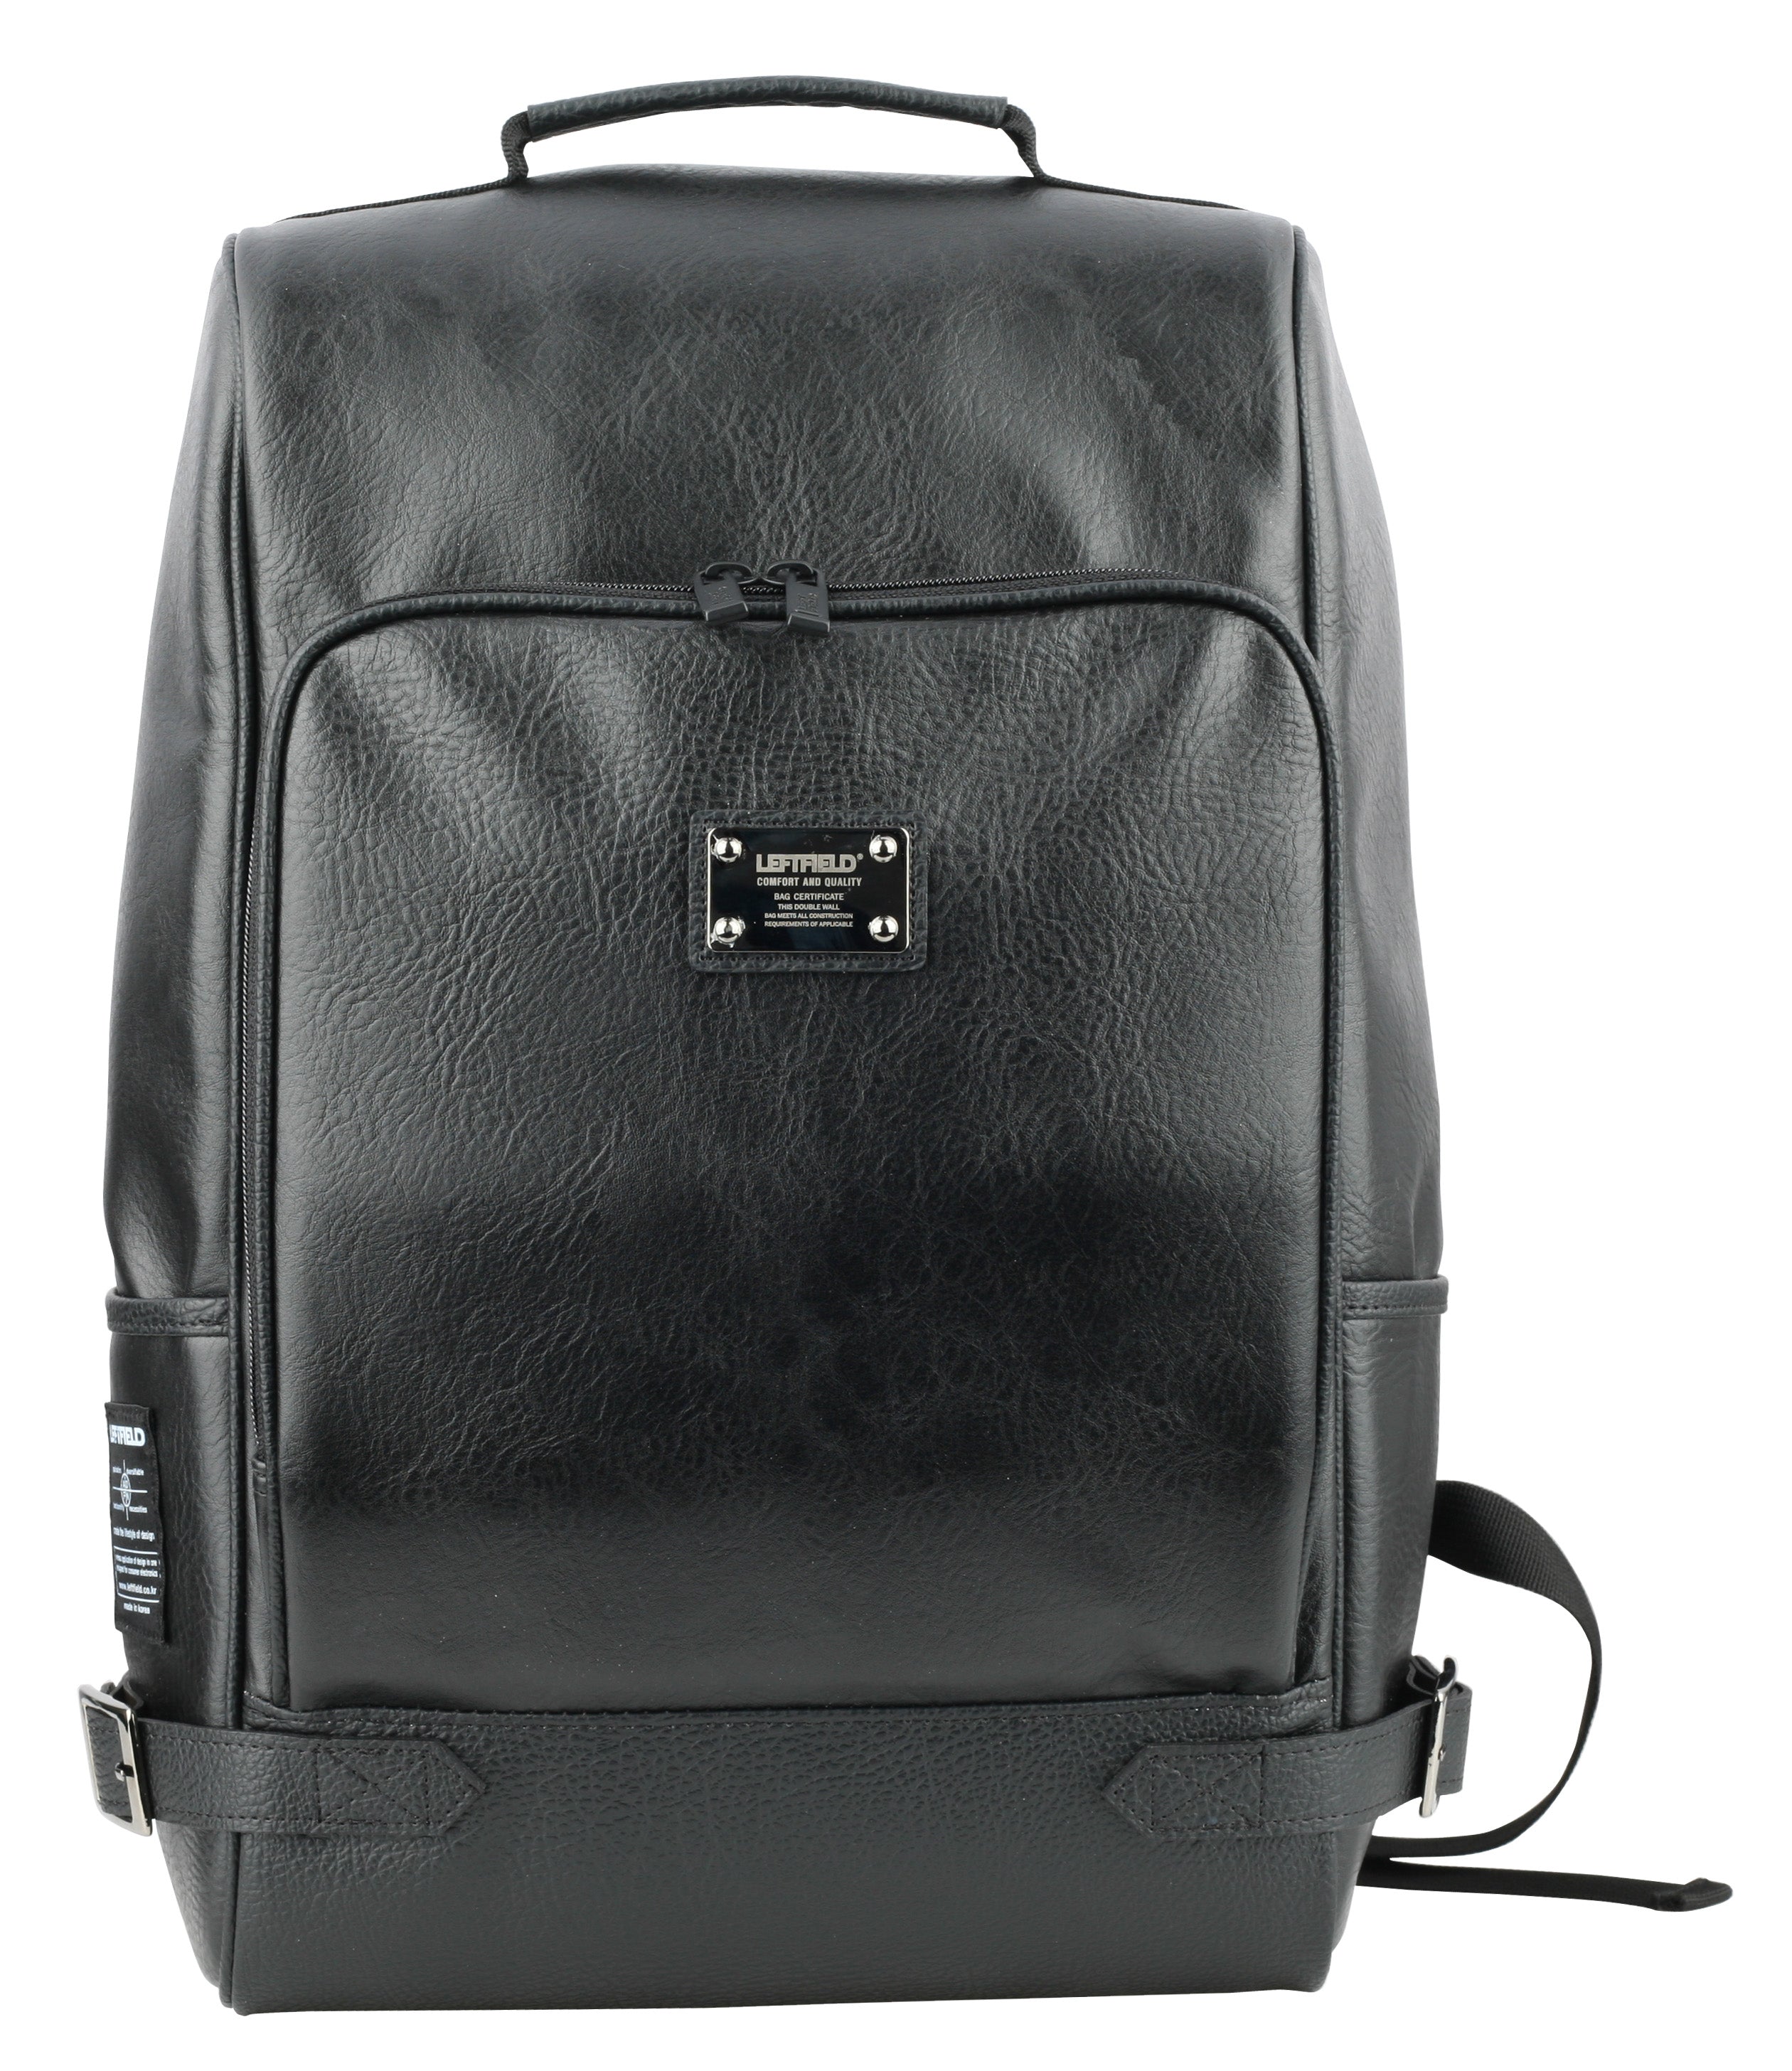 Black Casual Faux Leather School Backpacks Daypacks